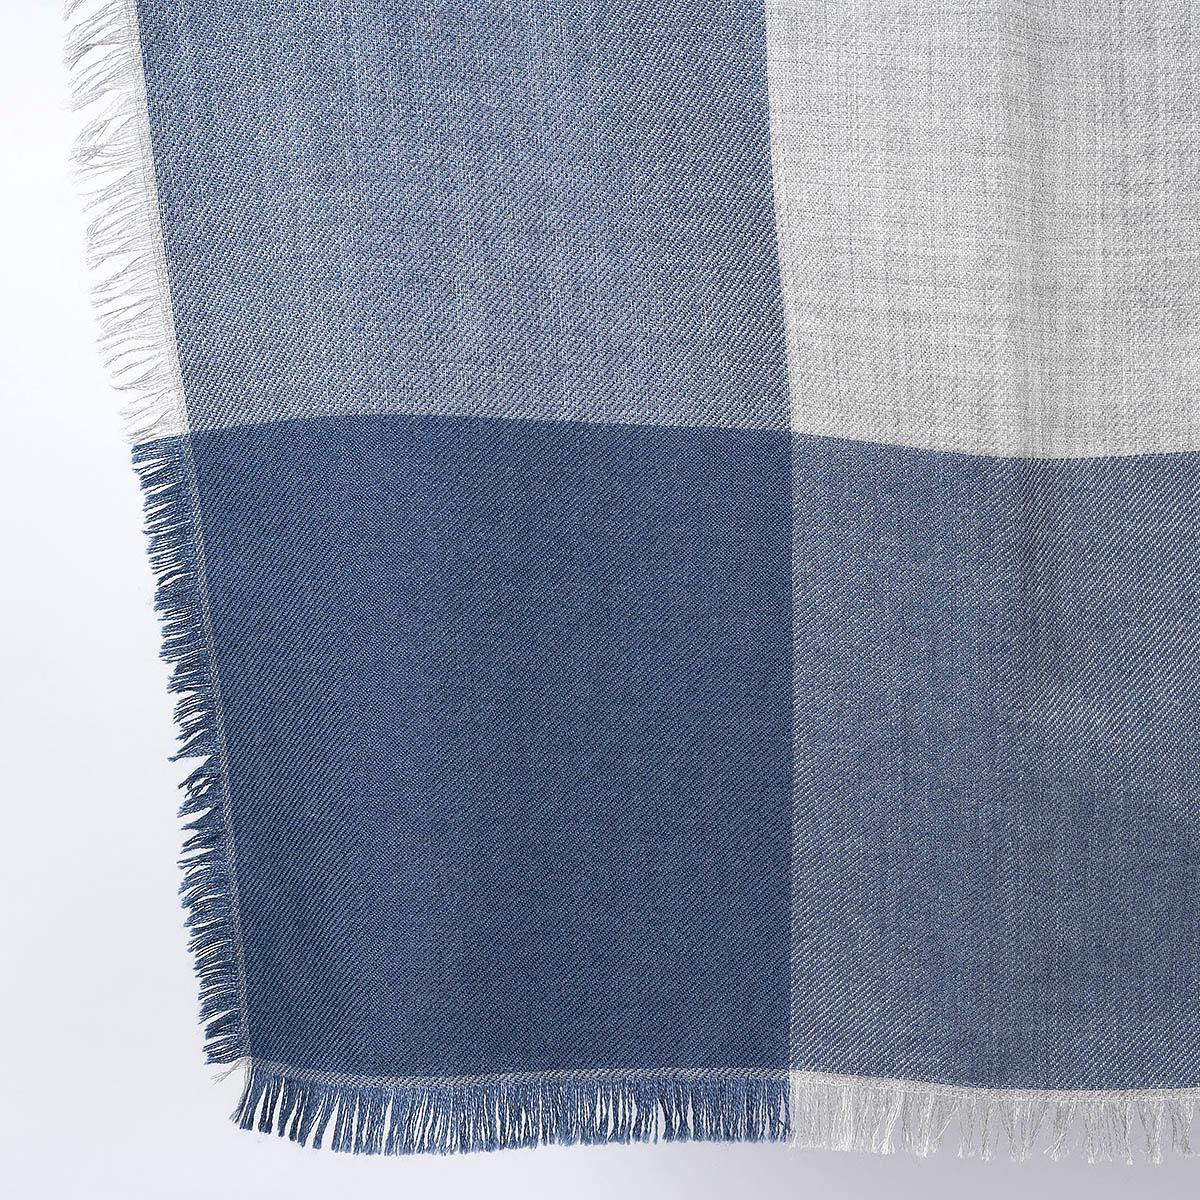 100% authentic Loro Piana Quadrilatero del Silenzio 90 scarf in blue, grey and light blue cashmere silk twill (100%). Has been worn once and is in virtually new condition. 

Measurements
Width	90cm (35.1in)
Length	90cm (35.1in)

All our listings